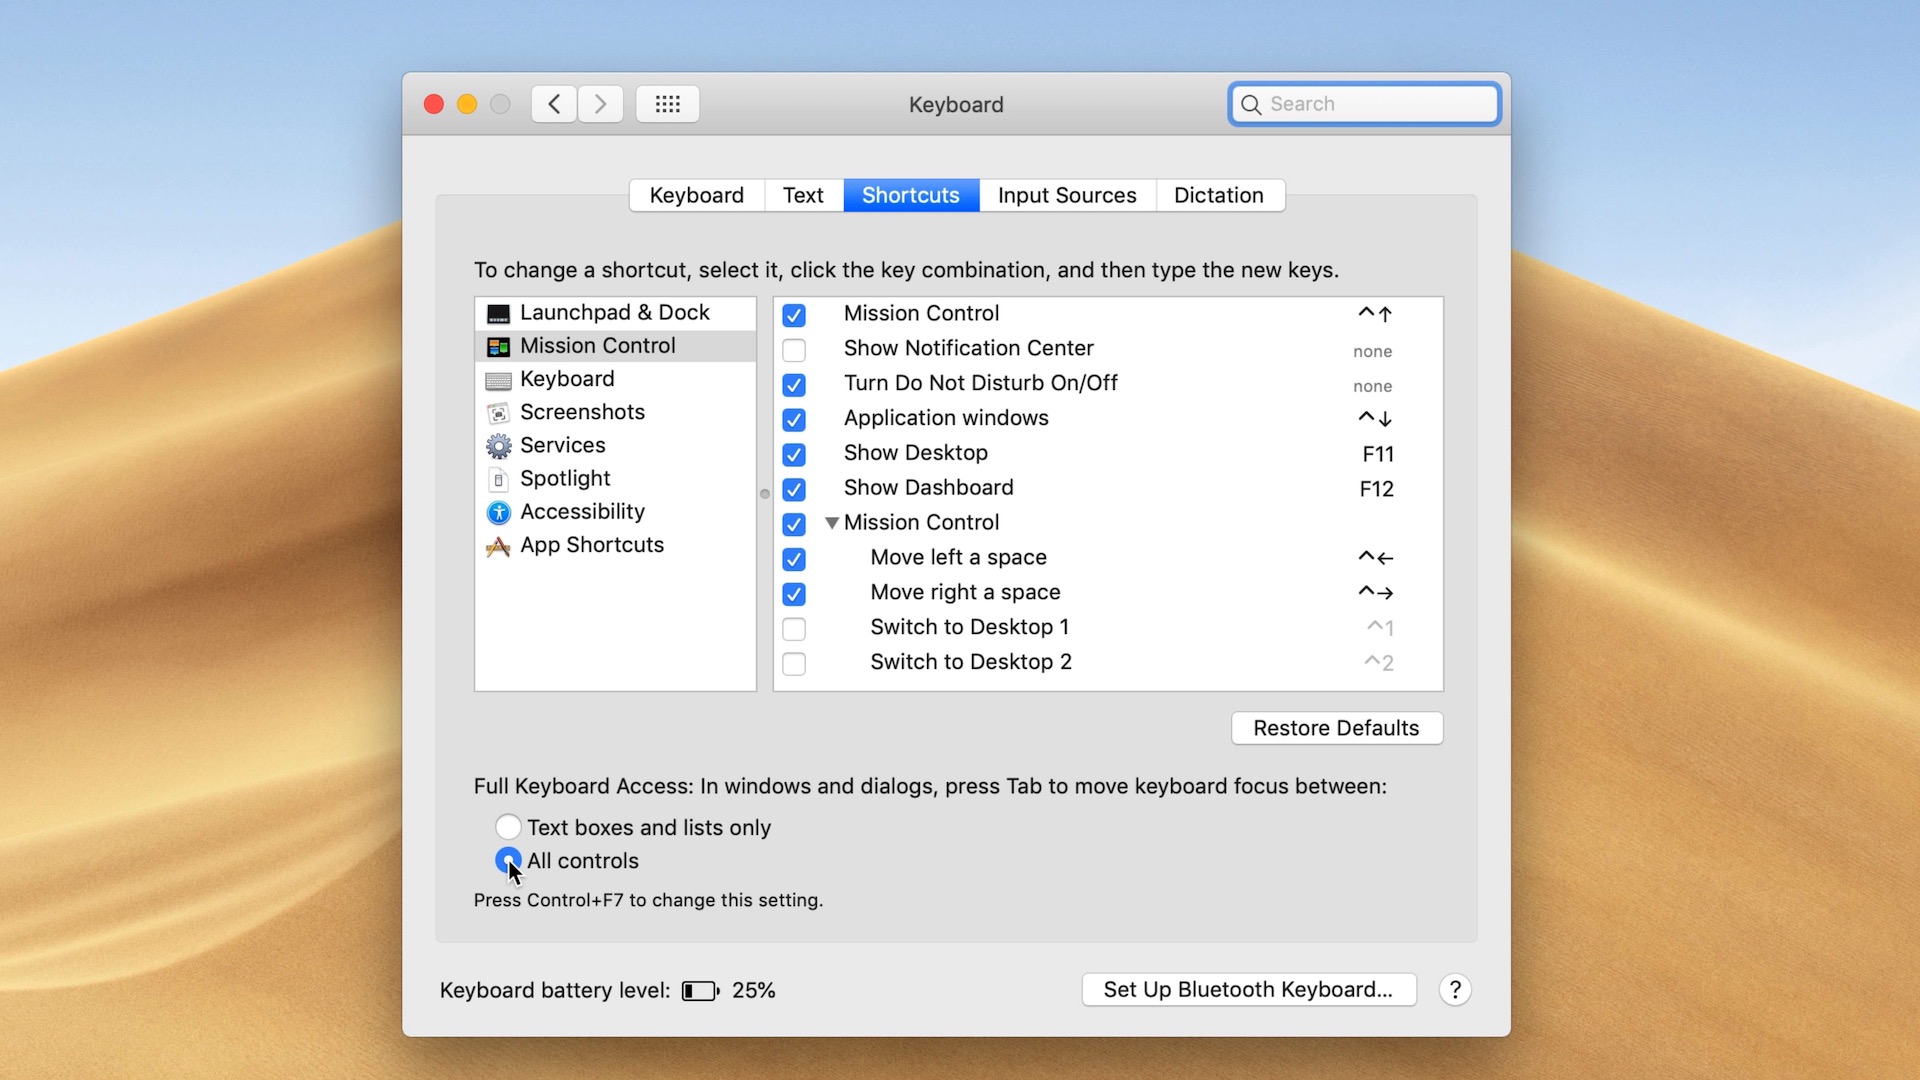 Enable all controls for tabbing on Mac